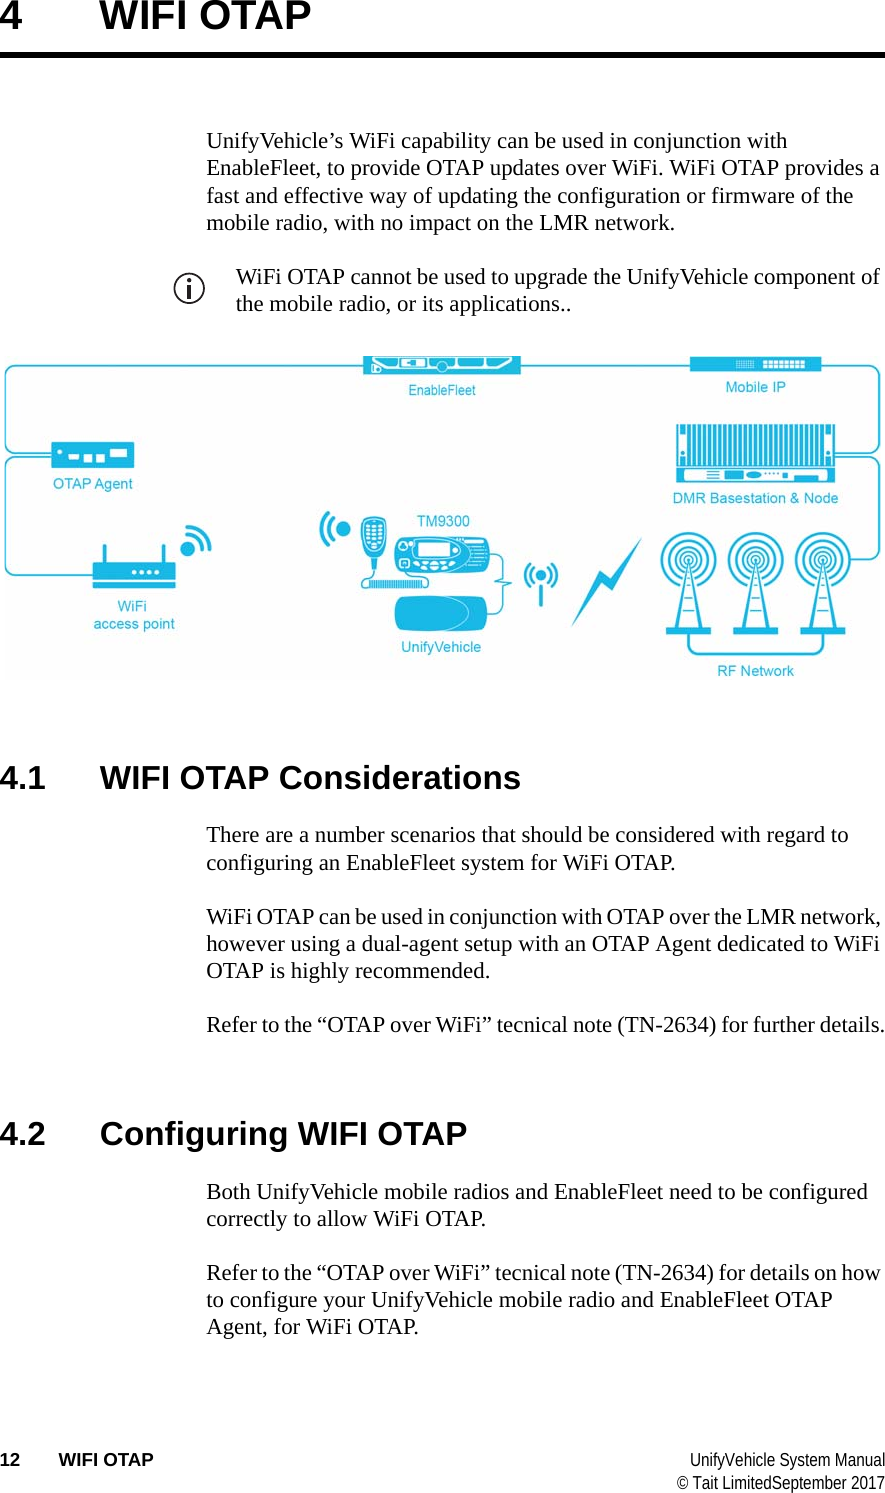  12 WIFI OTAP UnifyVehicle System Manual© Tait LimitedSeptember 20174 WIFI OTAPUnifyVehicle’s WiFi capability can be used in conjunction with EnableFleet, to provide OTAP updates over WiFi. WiFi OTAP provides a fast and effective way of updating the configuration or firmware of the mobile radio, with no impact on the LMR network.WiFi OTAP cannot be used to upgrade the UnifyVehicle component of the mobile radio, or its applications..4.1 WIFI OTAP ConsiderationsThere are a number scenarios that should be considered with regard to configuring an EnableFleet system for WiFi OTAP.WiFi OTAP can be used in conjunction with OTAP over the LMR network, however using a dual-agent setup with an OTAP Agent dedicated to WiFi OTAP is highly recommended.Refer to the “OTAP over WiFi” tecnical note (TN-2634) for further details.4.2 Configuring WIFI OTAPBoth UnifyVehicle mobile radios and EnableFleet need to be configured correctly to allow WiFi OTAP.Refer to the “OTAP over WiFi” tecnical note (TN-2634) for details on how to configure your UnifyVehicle mobile radio and EnableFleet OTAP Agent, for WiFi OTAP.